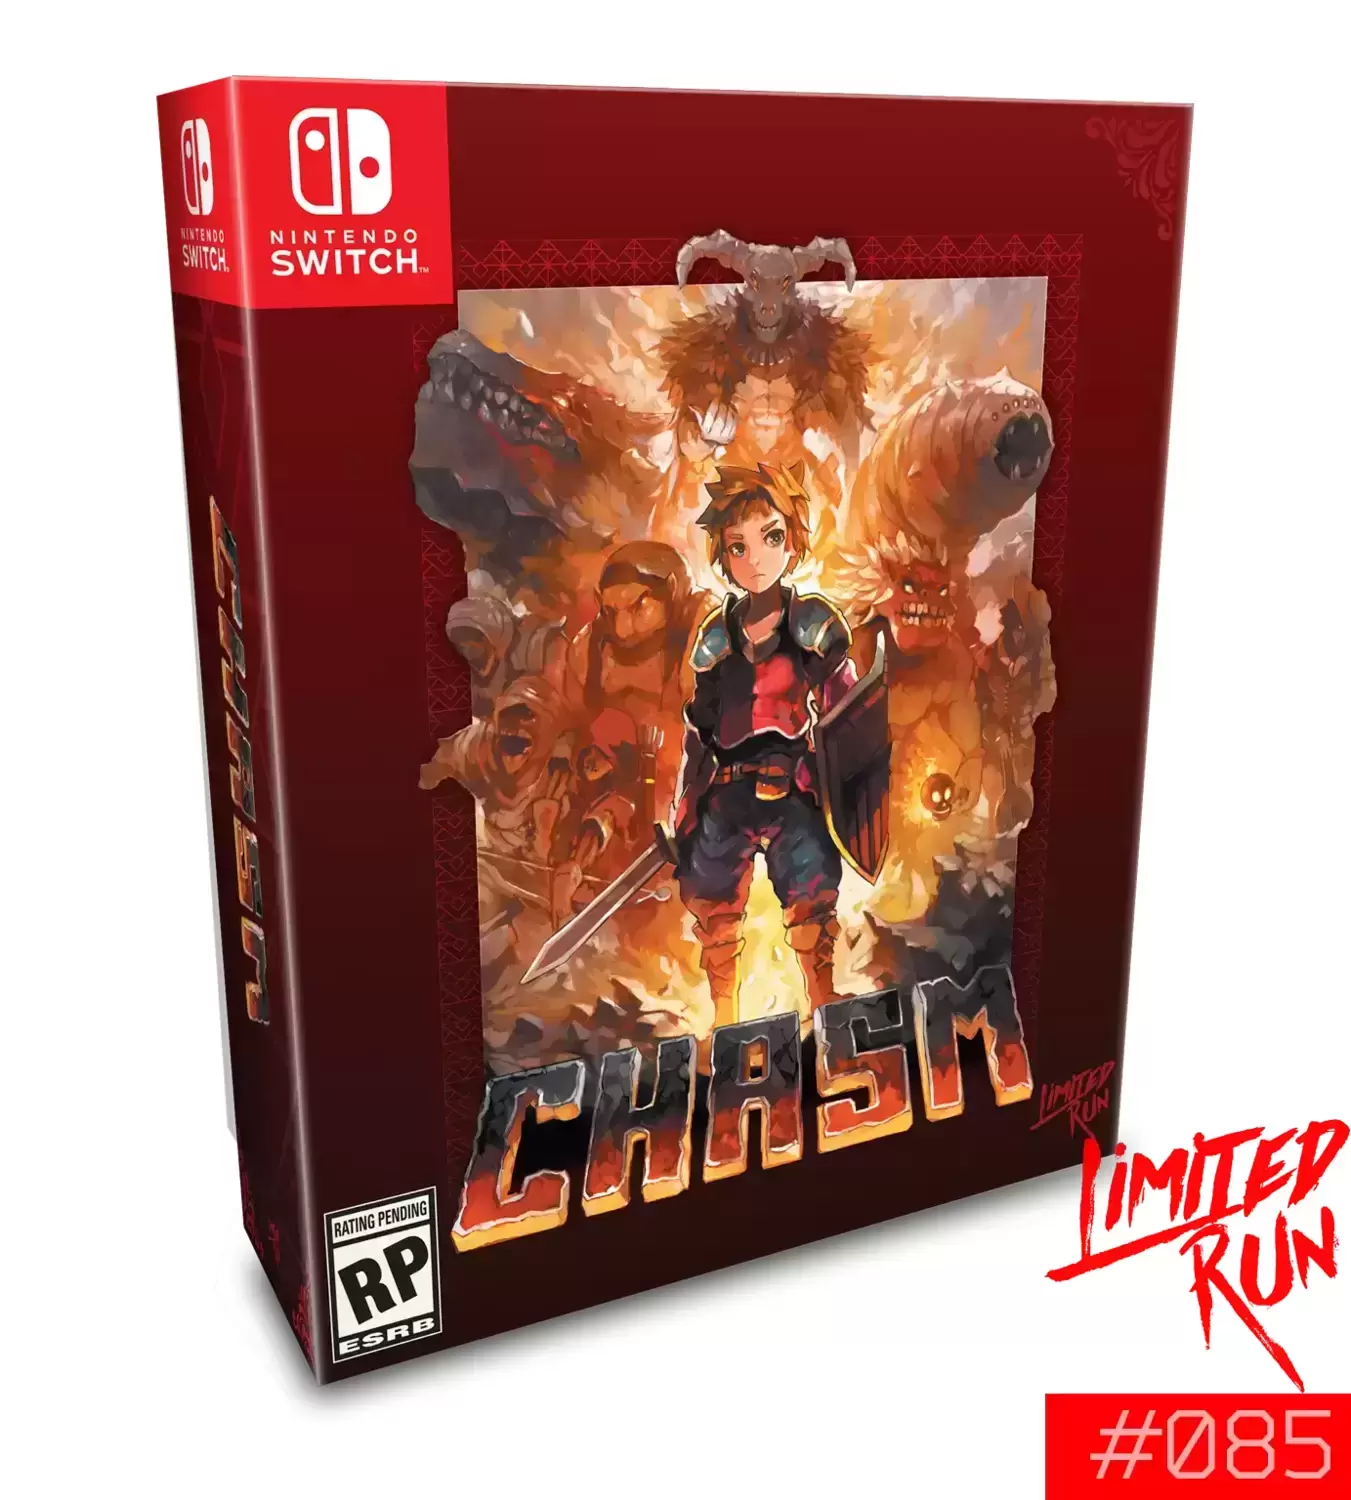 Jeux Nintendo Switch - Chasm Classic Edition - Limites Run Games